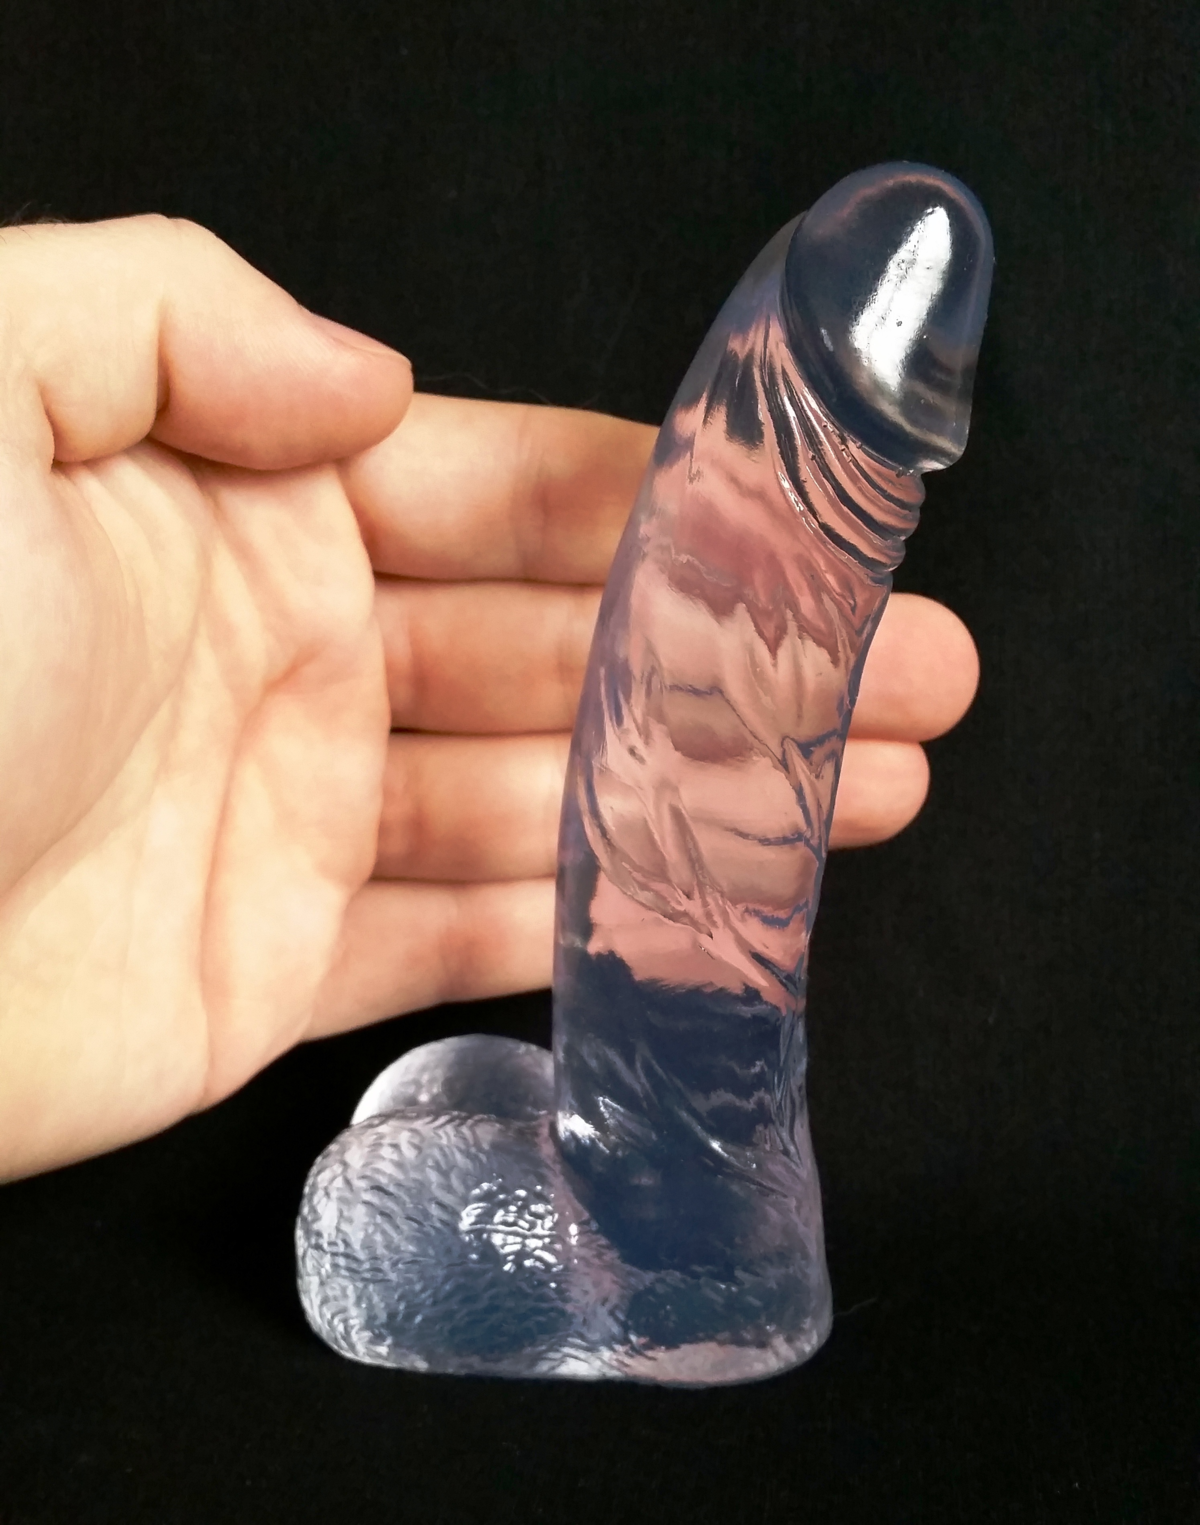 Sgt. C. recomended putting glass buttplug inside public